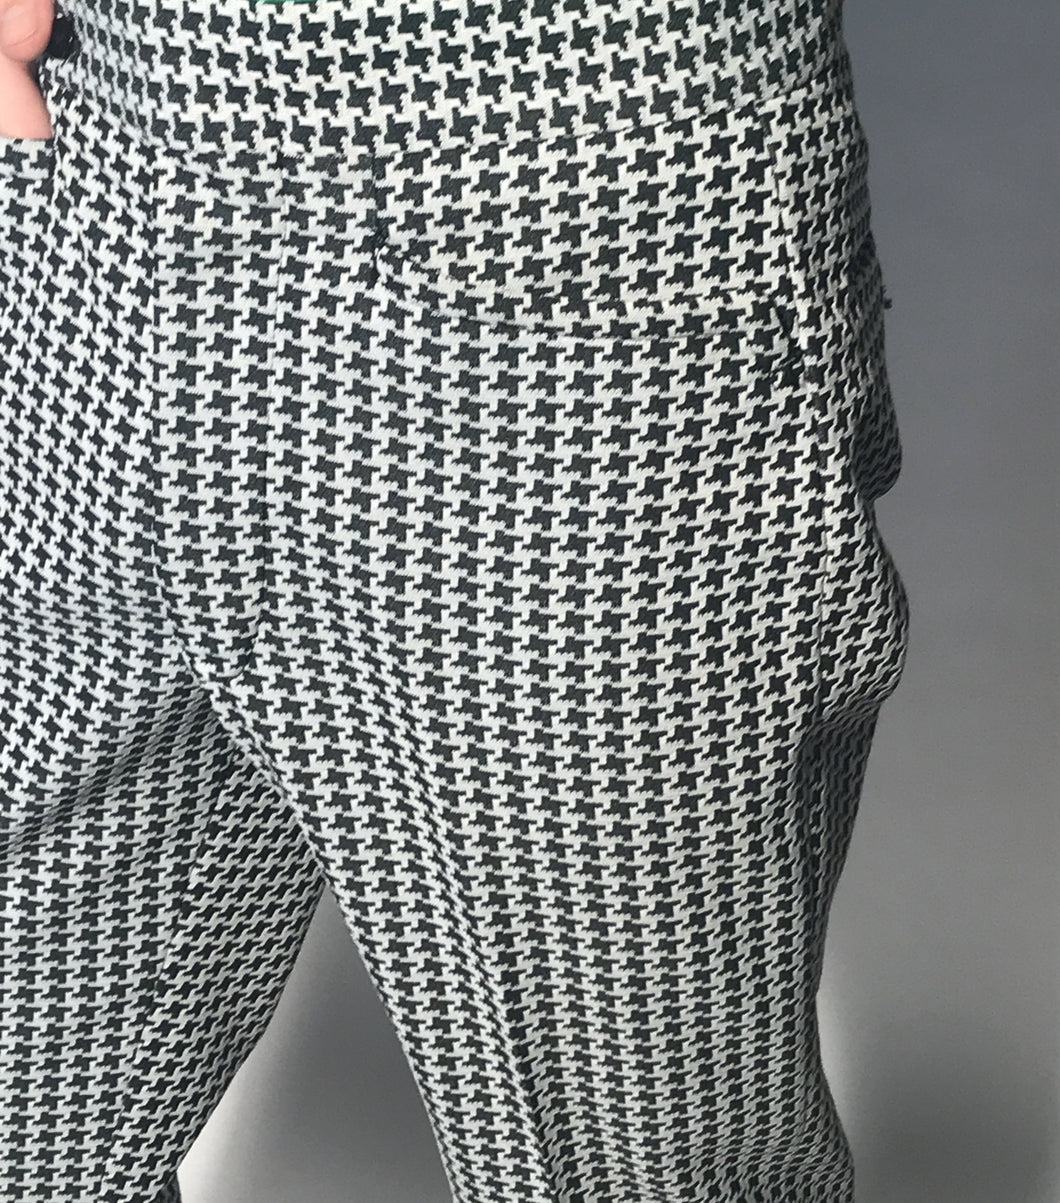 Vintage Men's Golf Black and White Houndstooth Polyester Pants Size 32